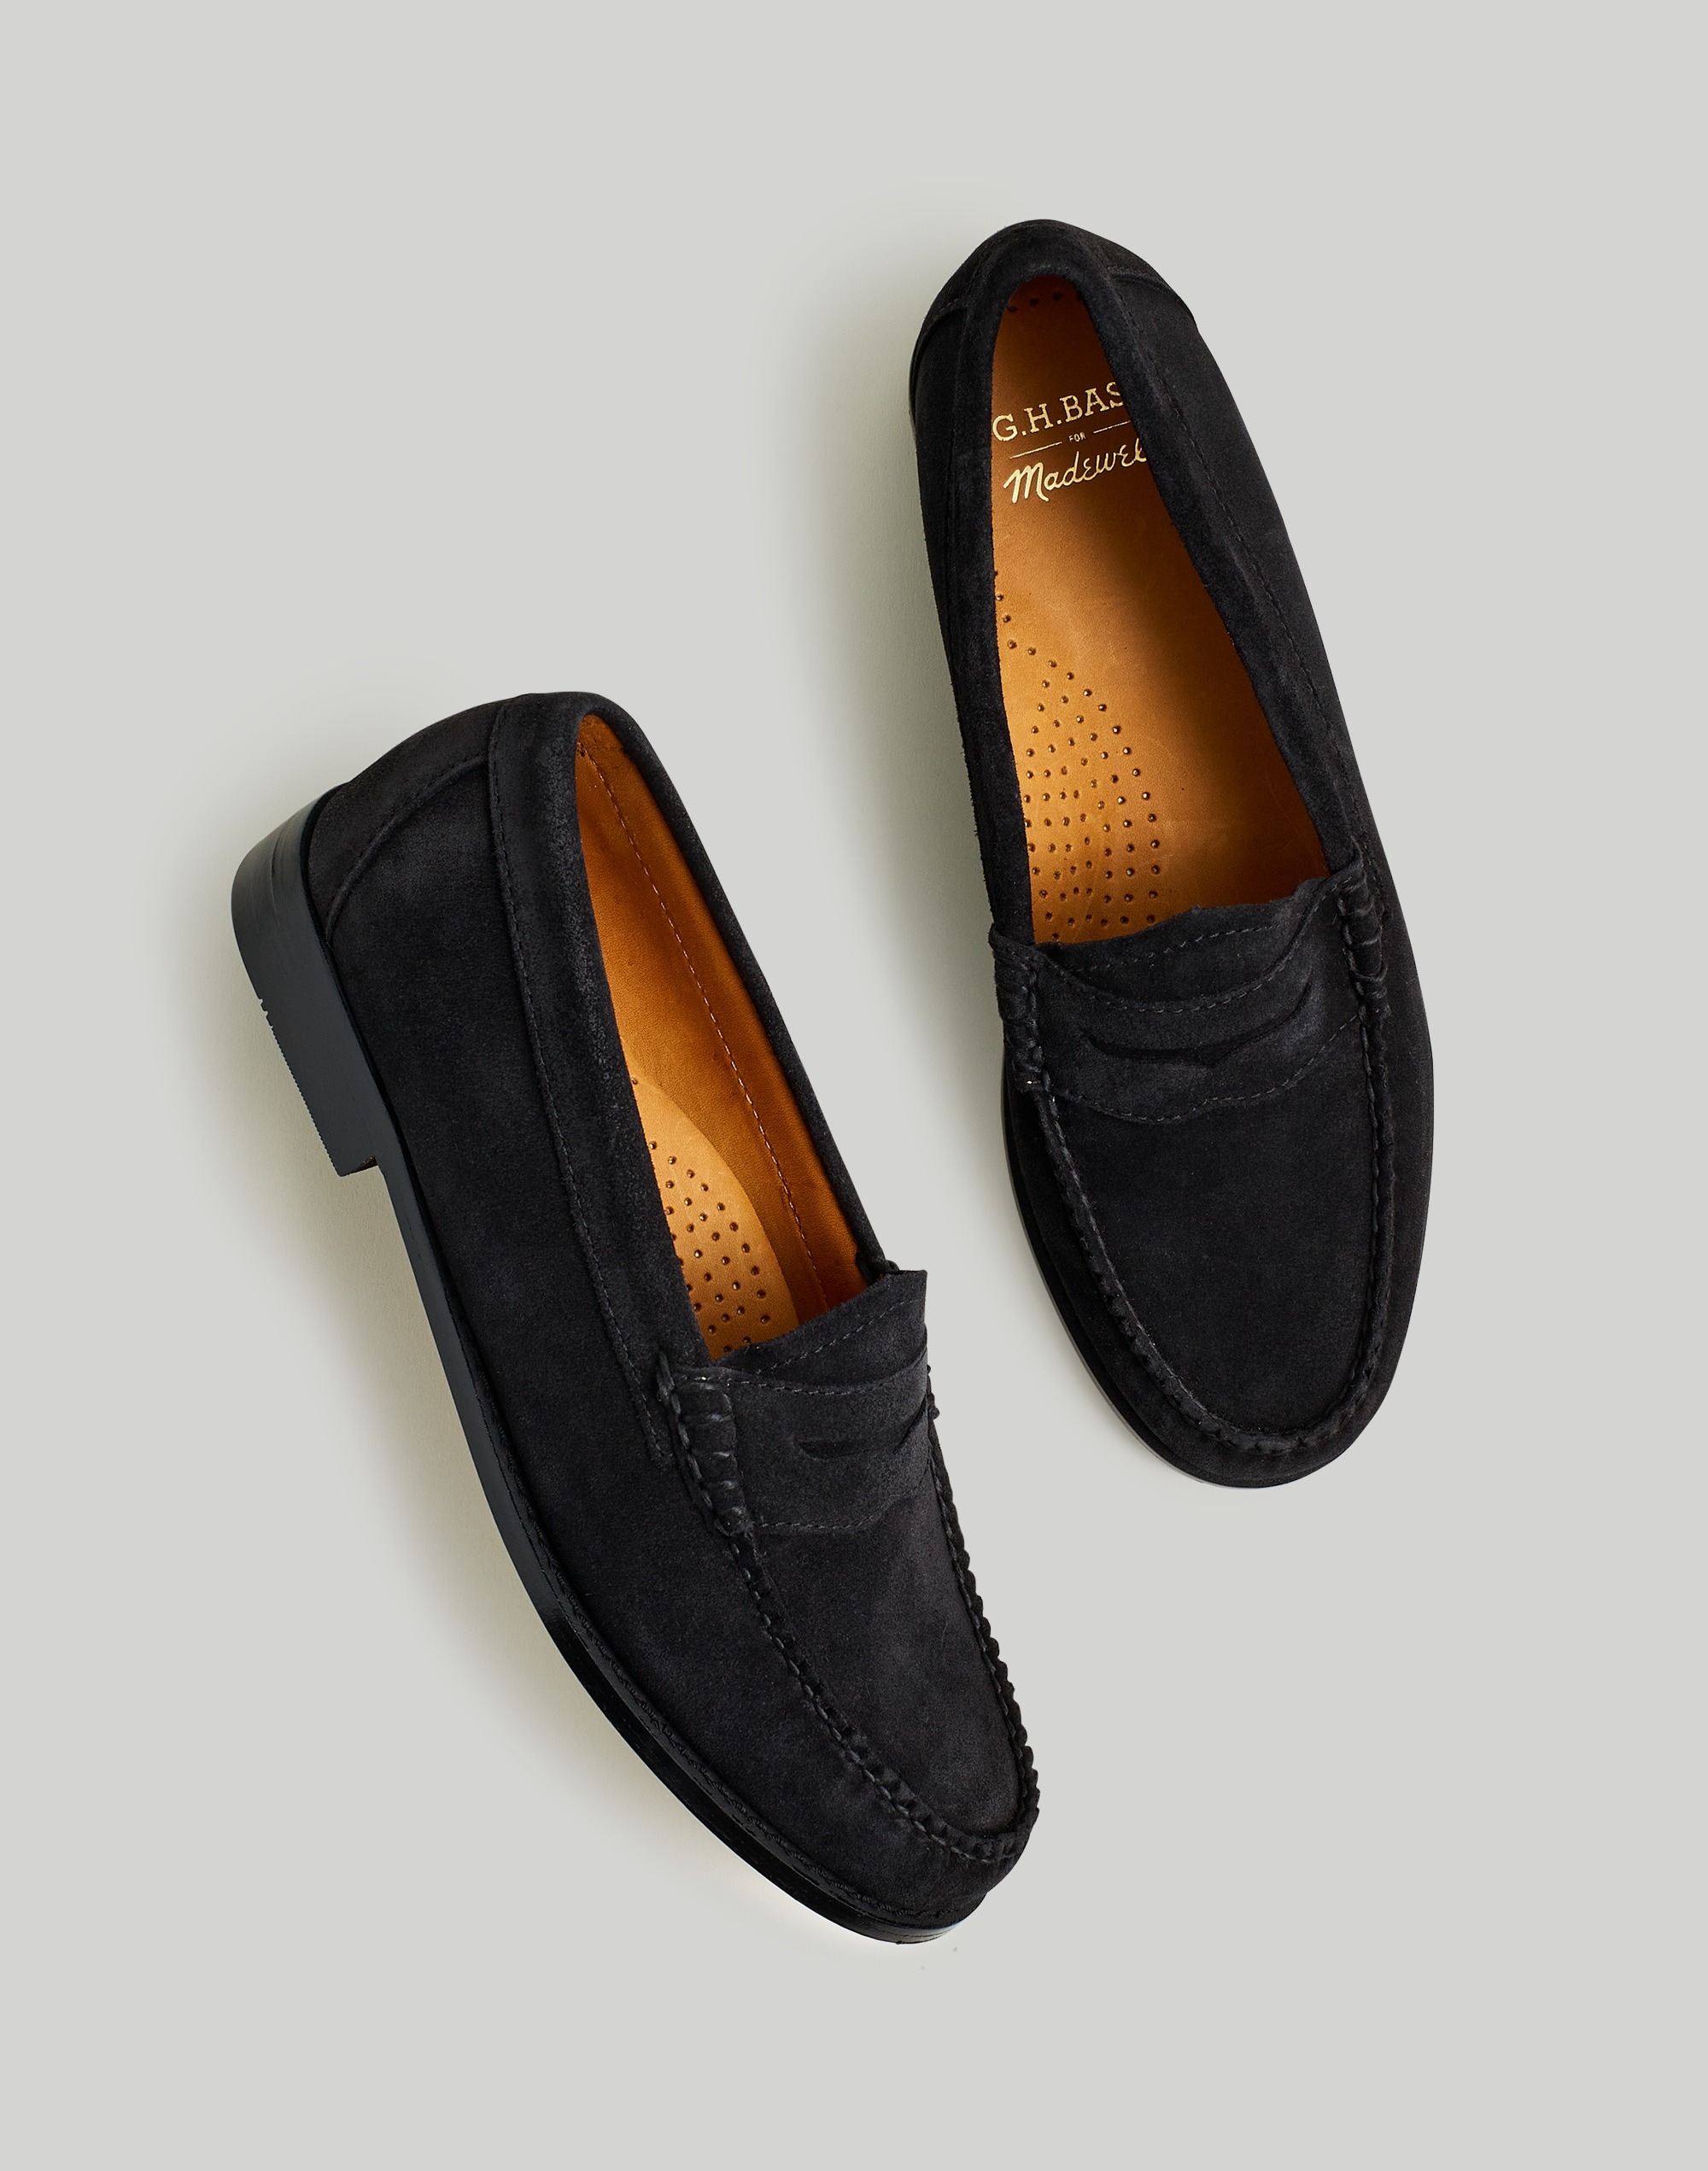 Madewell x G.H.BASS Whitney Weejuns® Penny Loafers